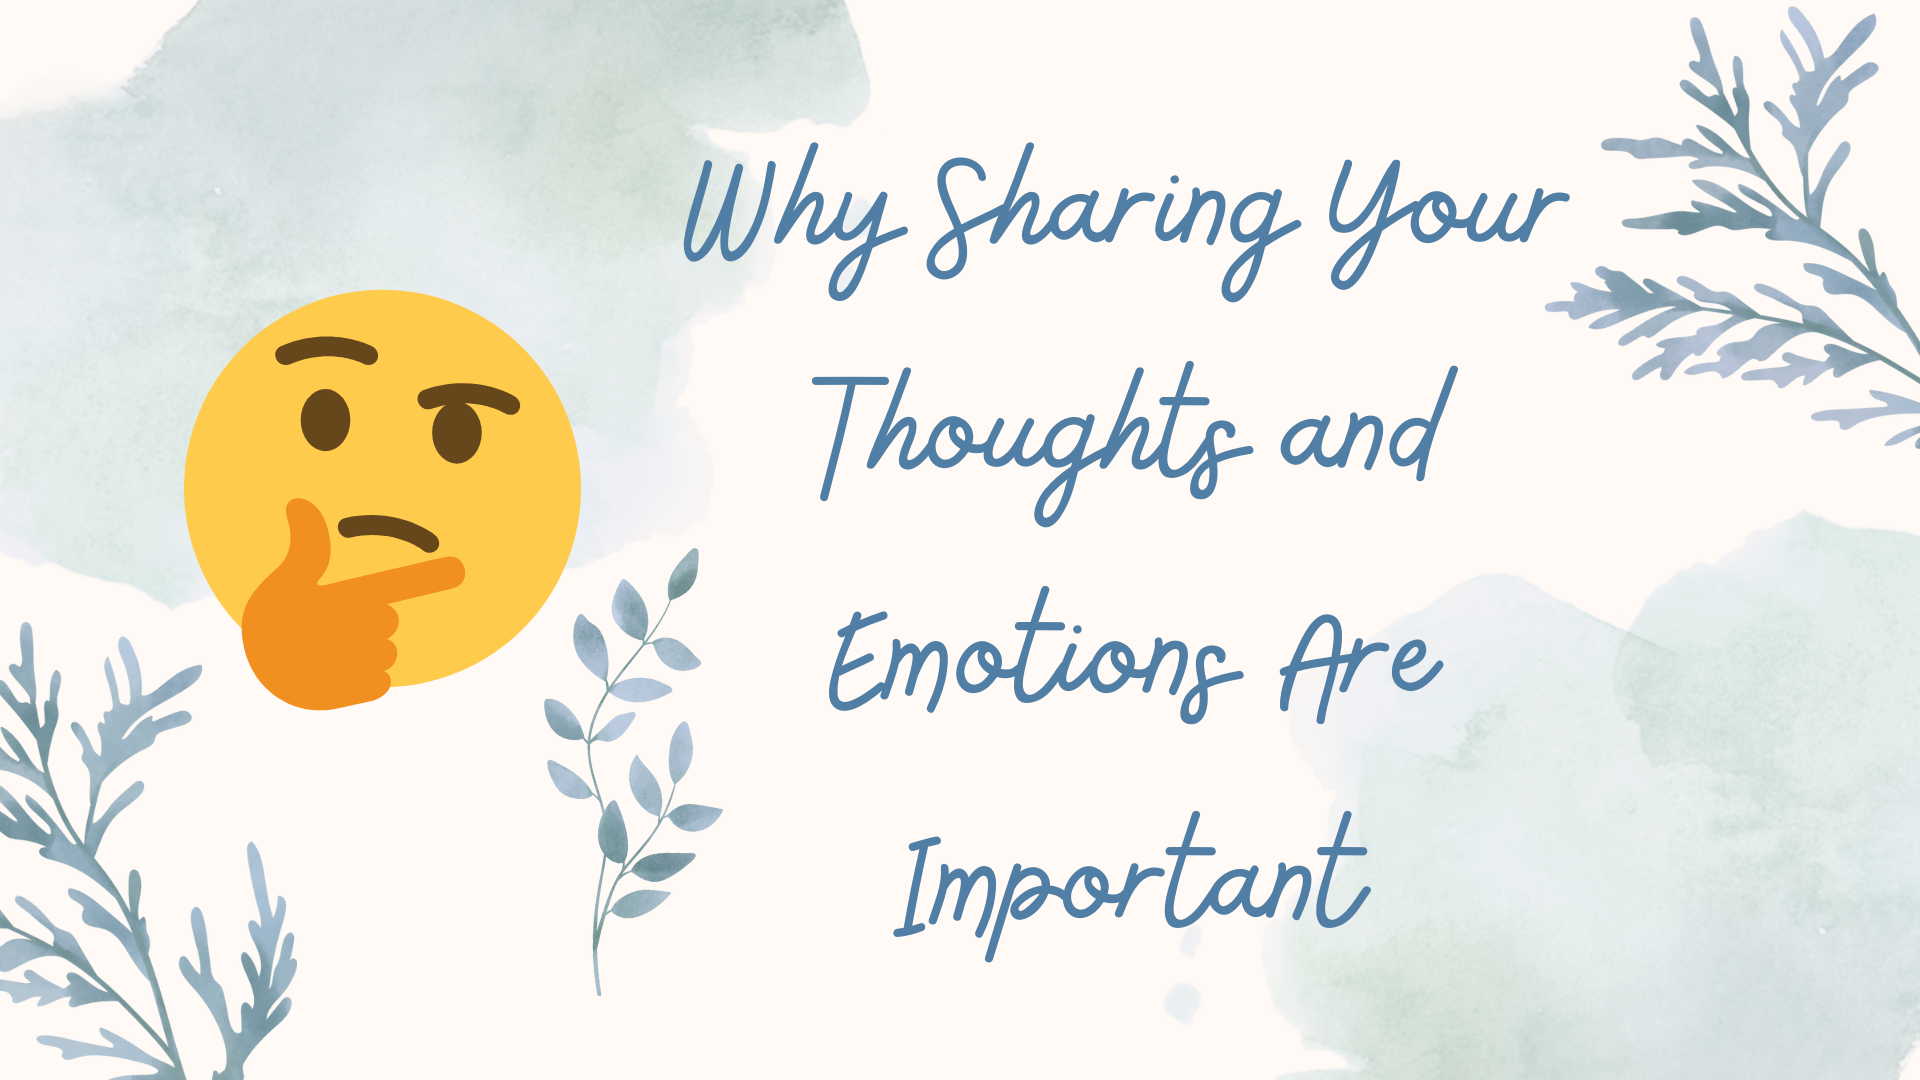 Why Sharing Your Thoughts and Emotions Are Important